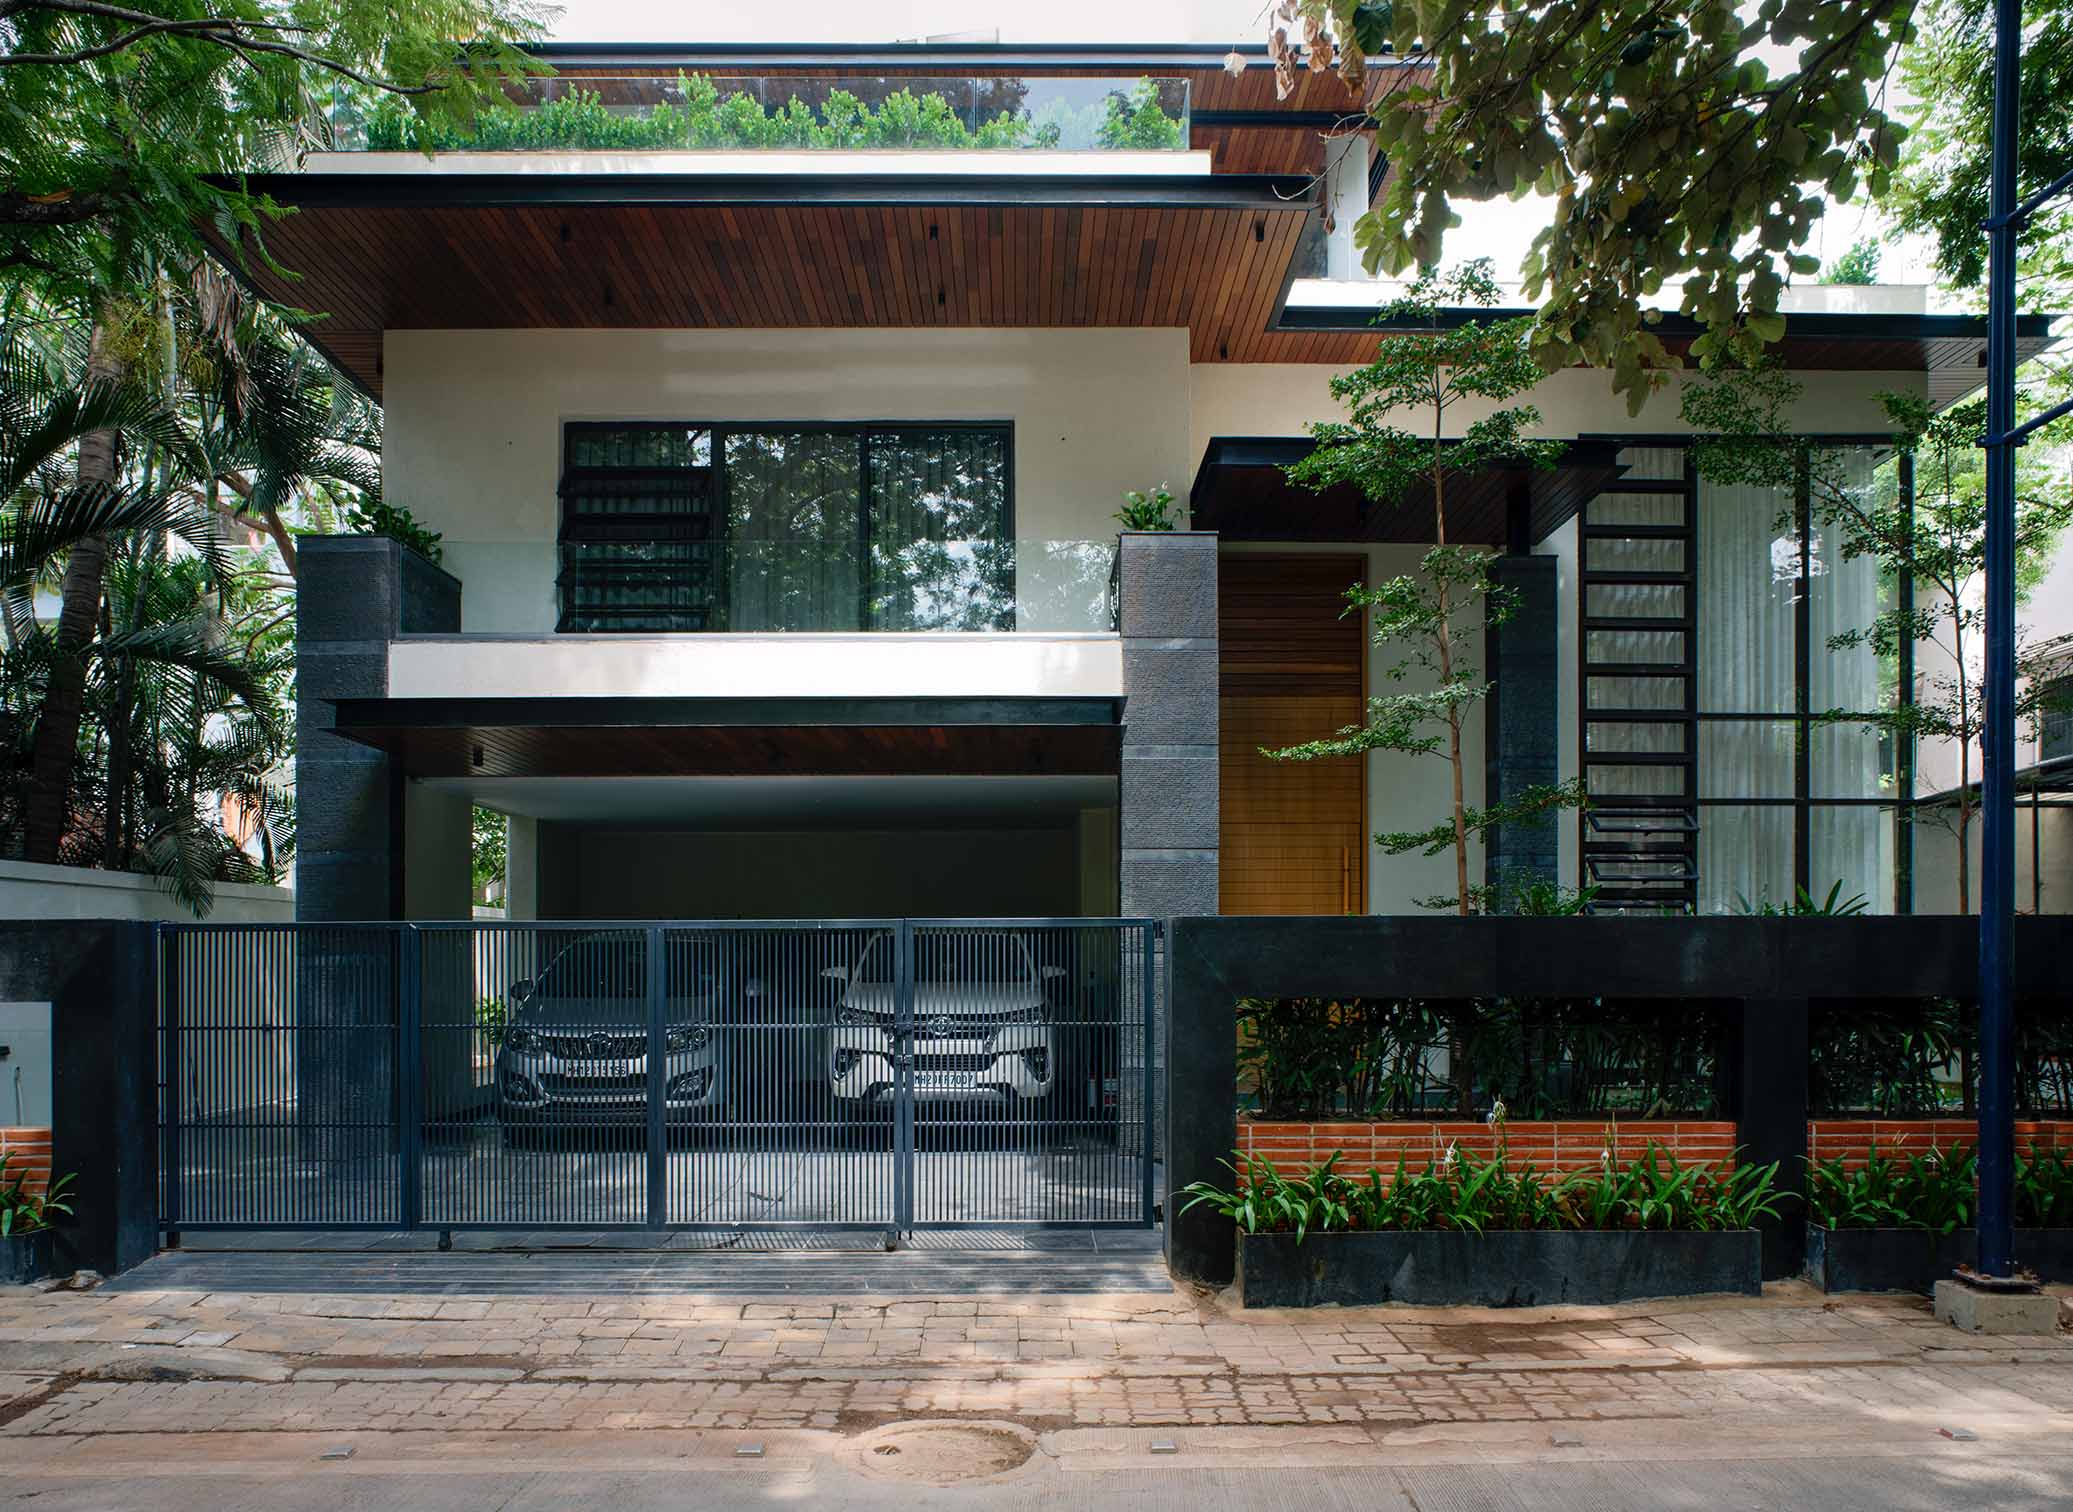 Canopy Chronicles:  A Home Balancing Minimalism with the Aid of Volumes